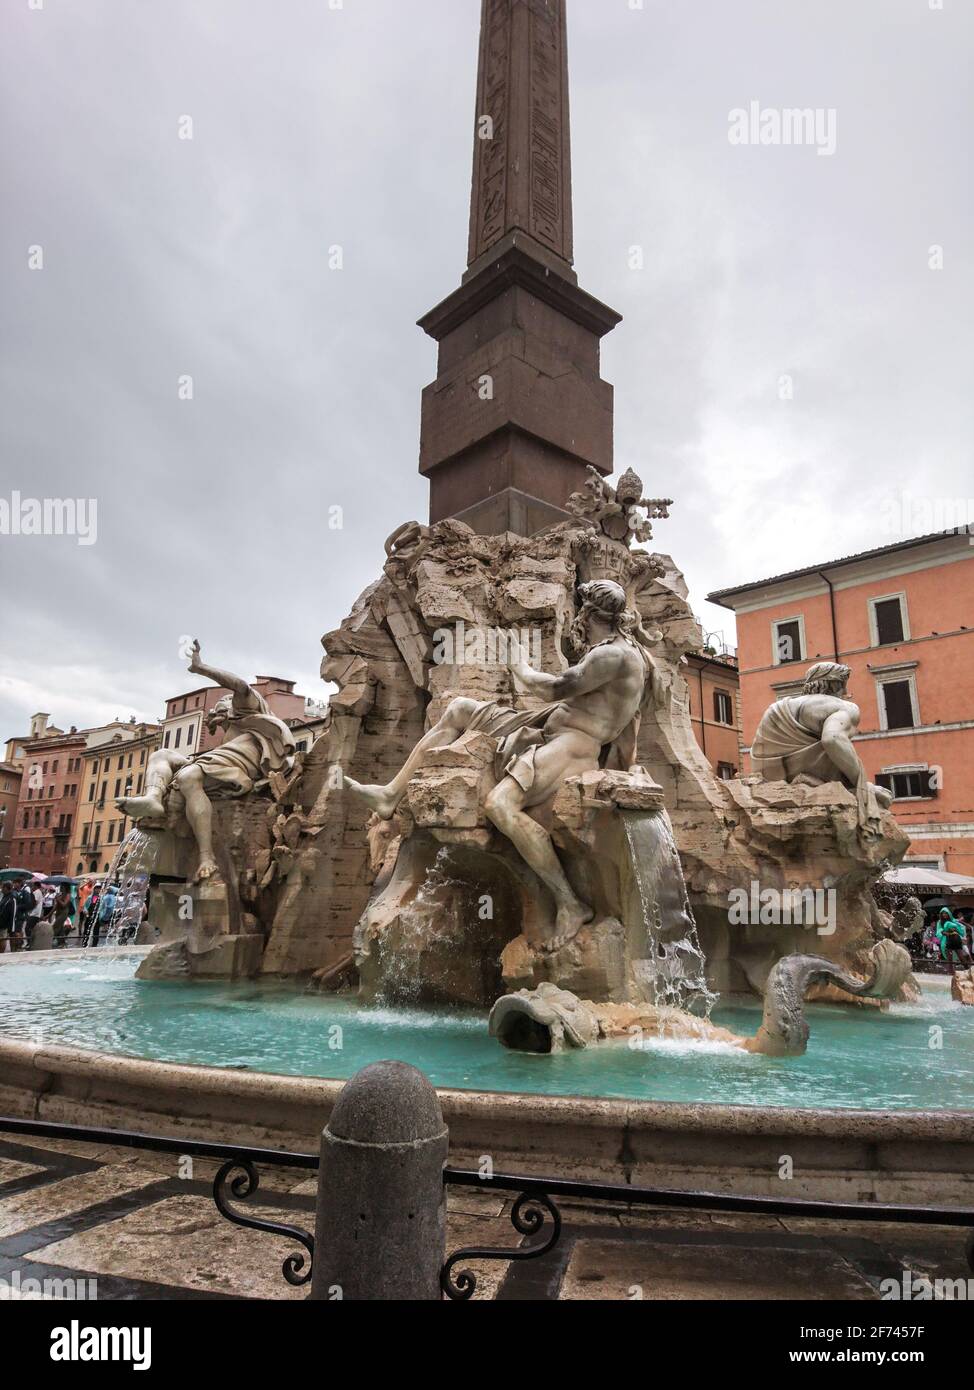 Rome, Italy - August 18, 2019: Bernini's Fountain of the Four Rivers with Obelisco Agonale, ancient obelisk in the center, close-up on cloudy day Stock Photo